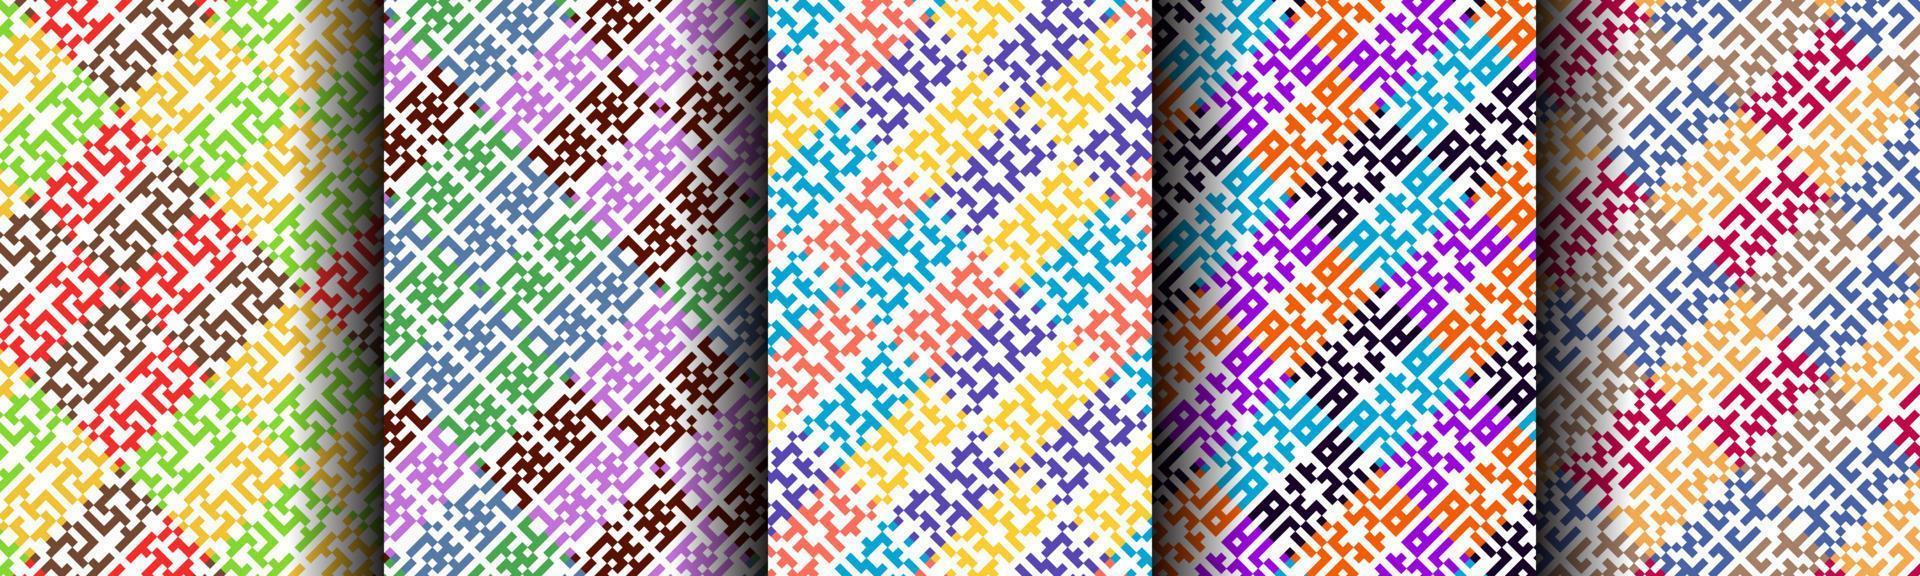 modern abstract pattern geometric background collection set vector